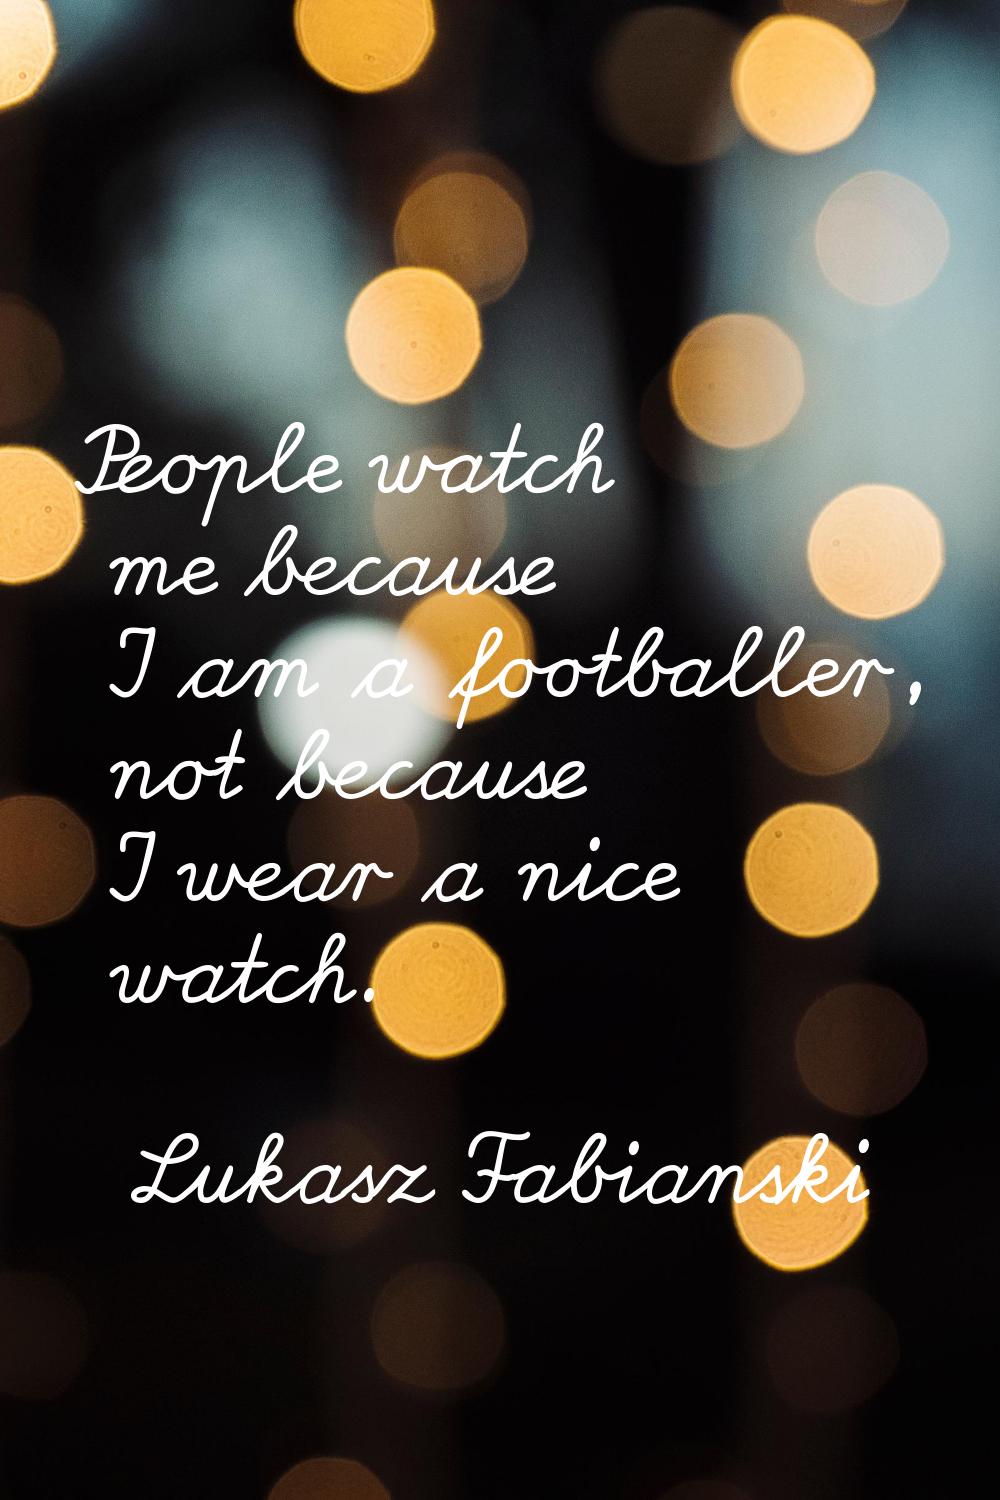 People watch me because I am a footballer, not because I wear a nice watch.